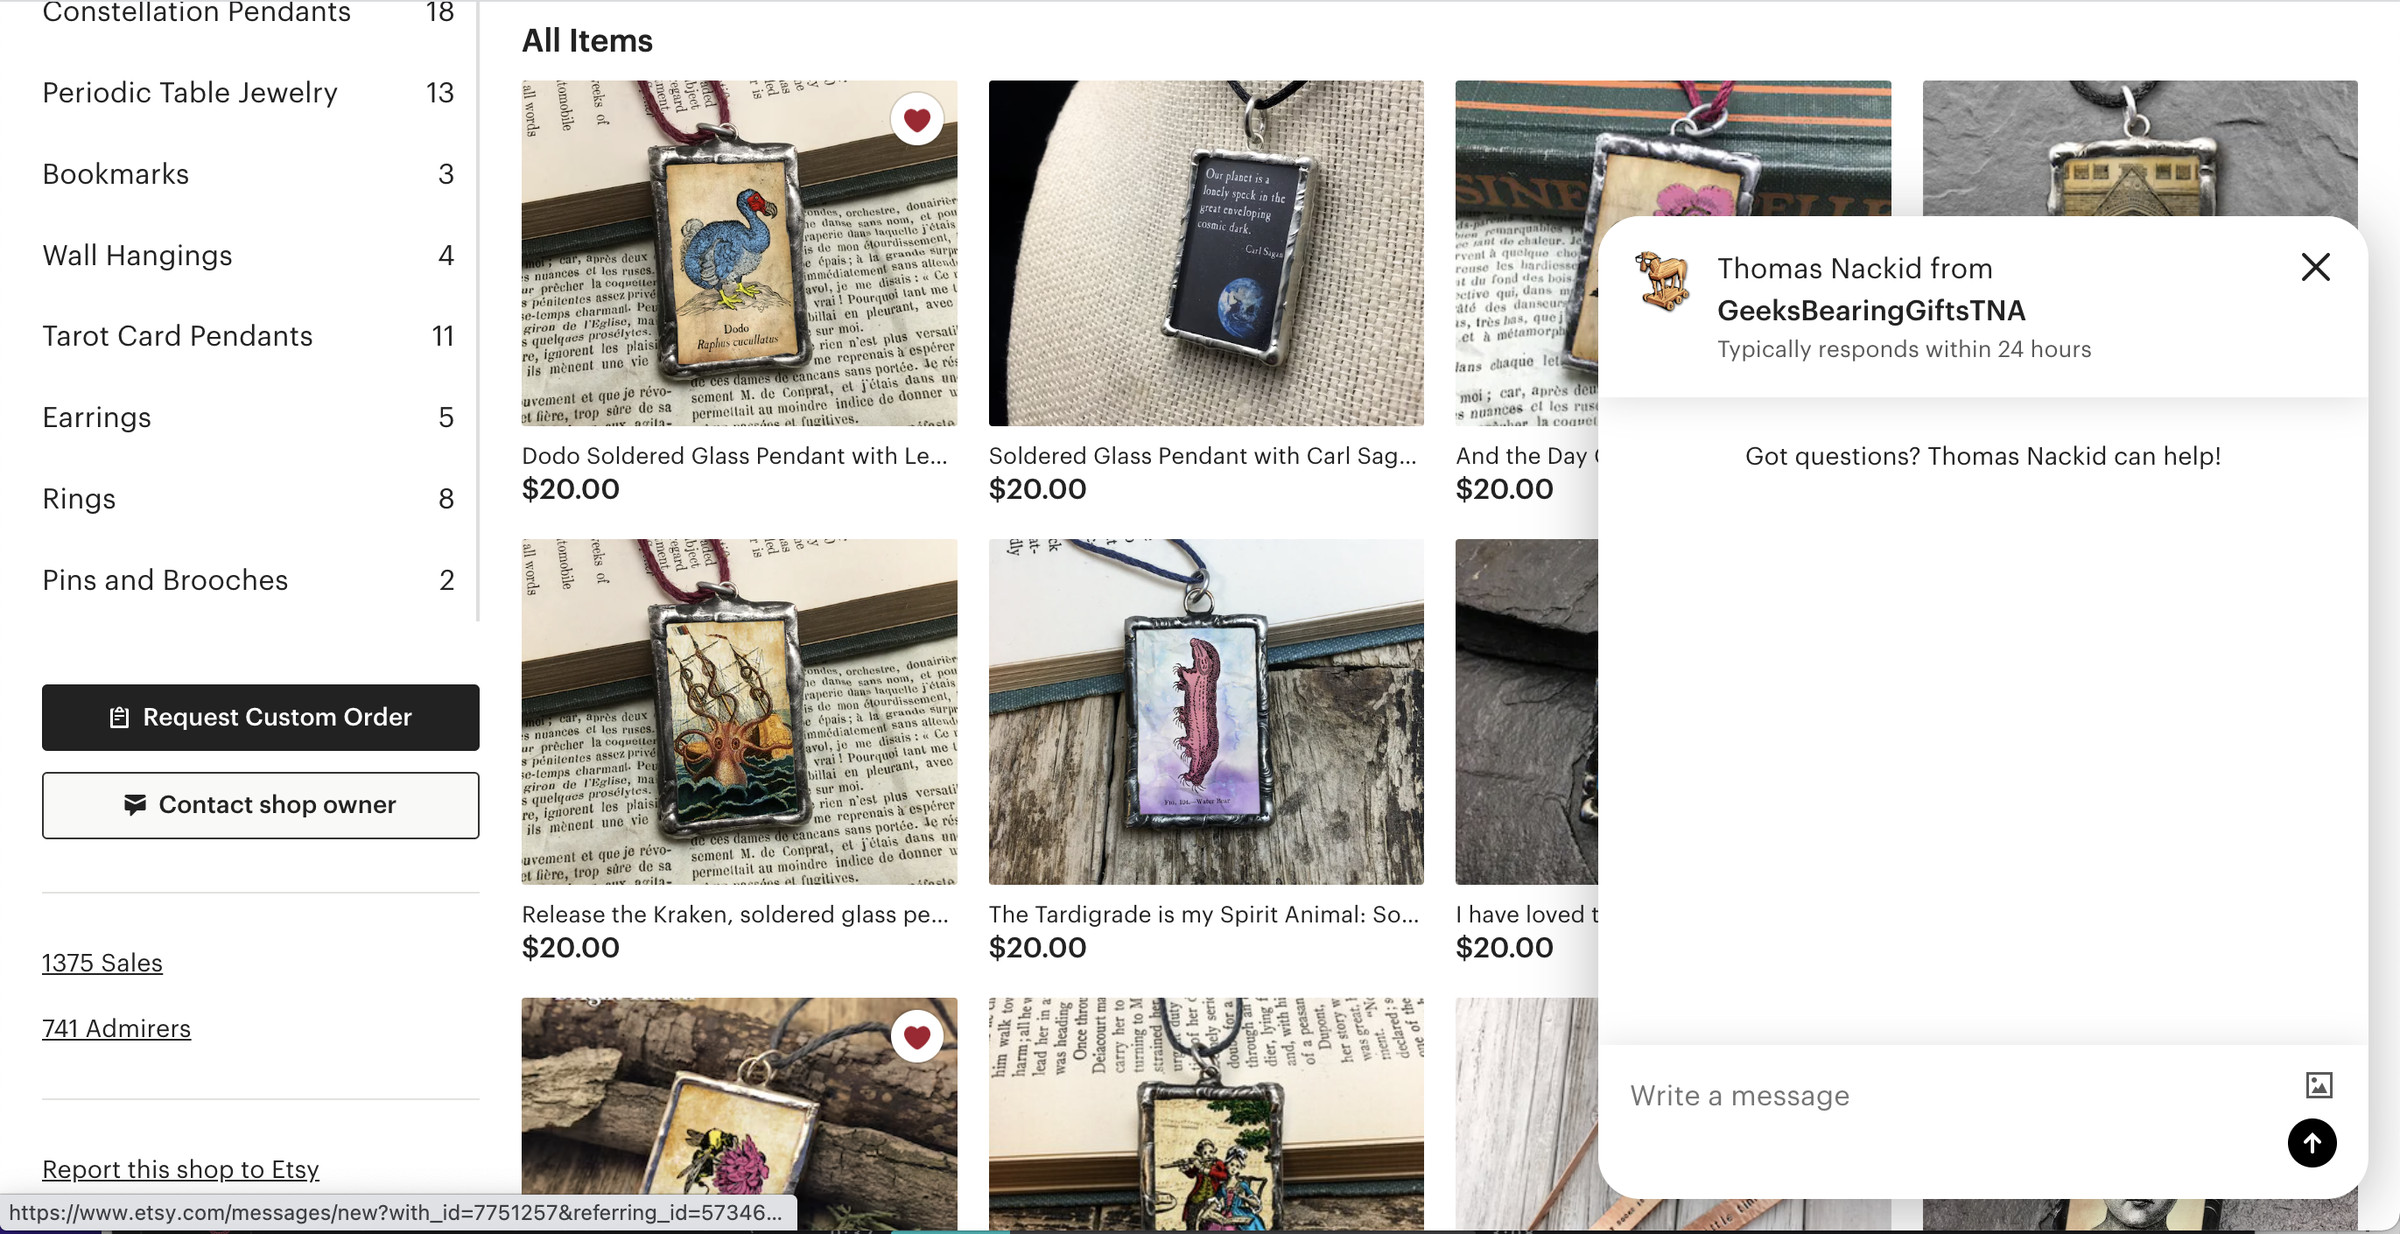 You can contact a favorite seller via their Etsy listing.